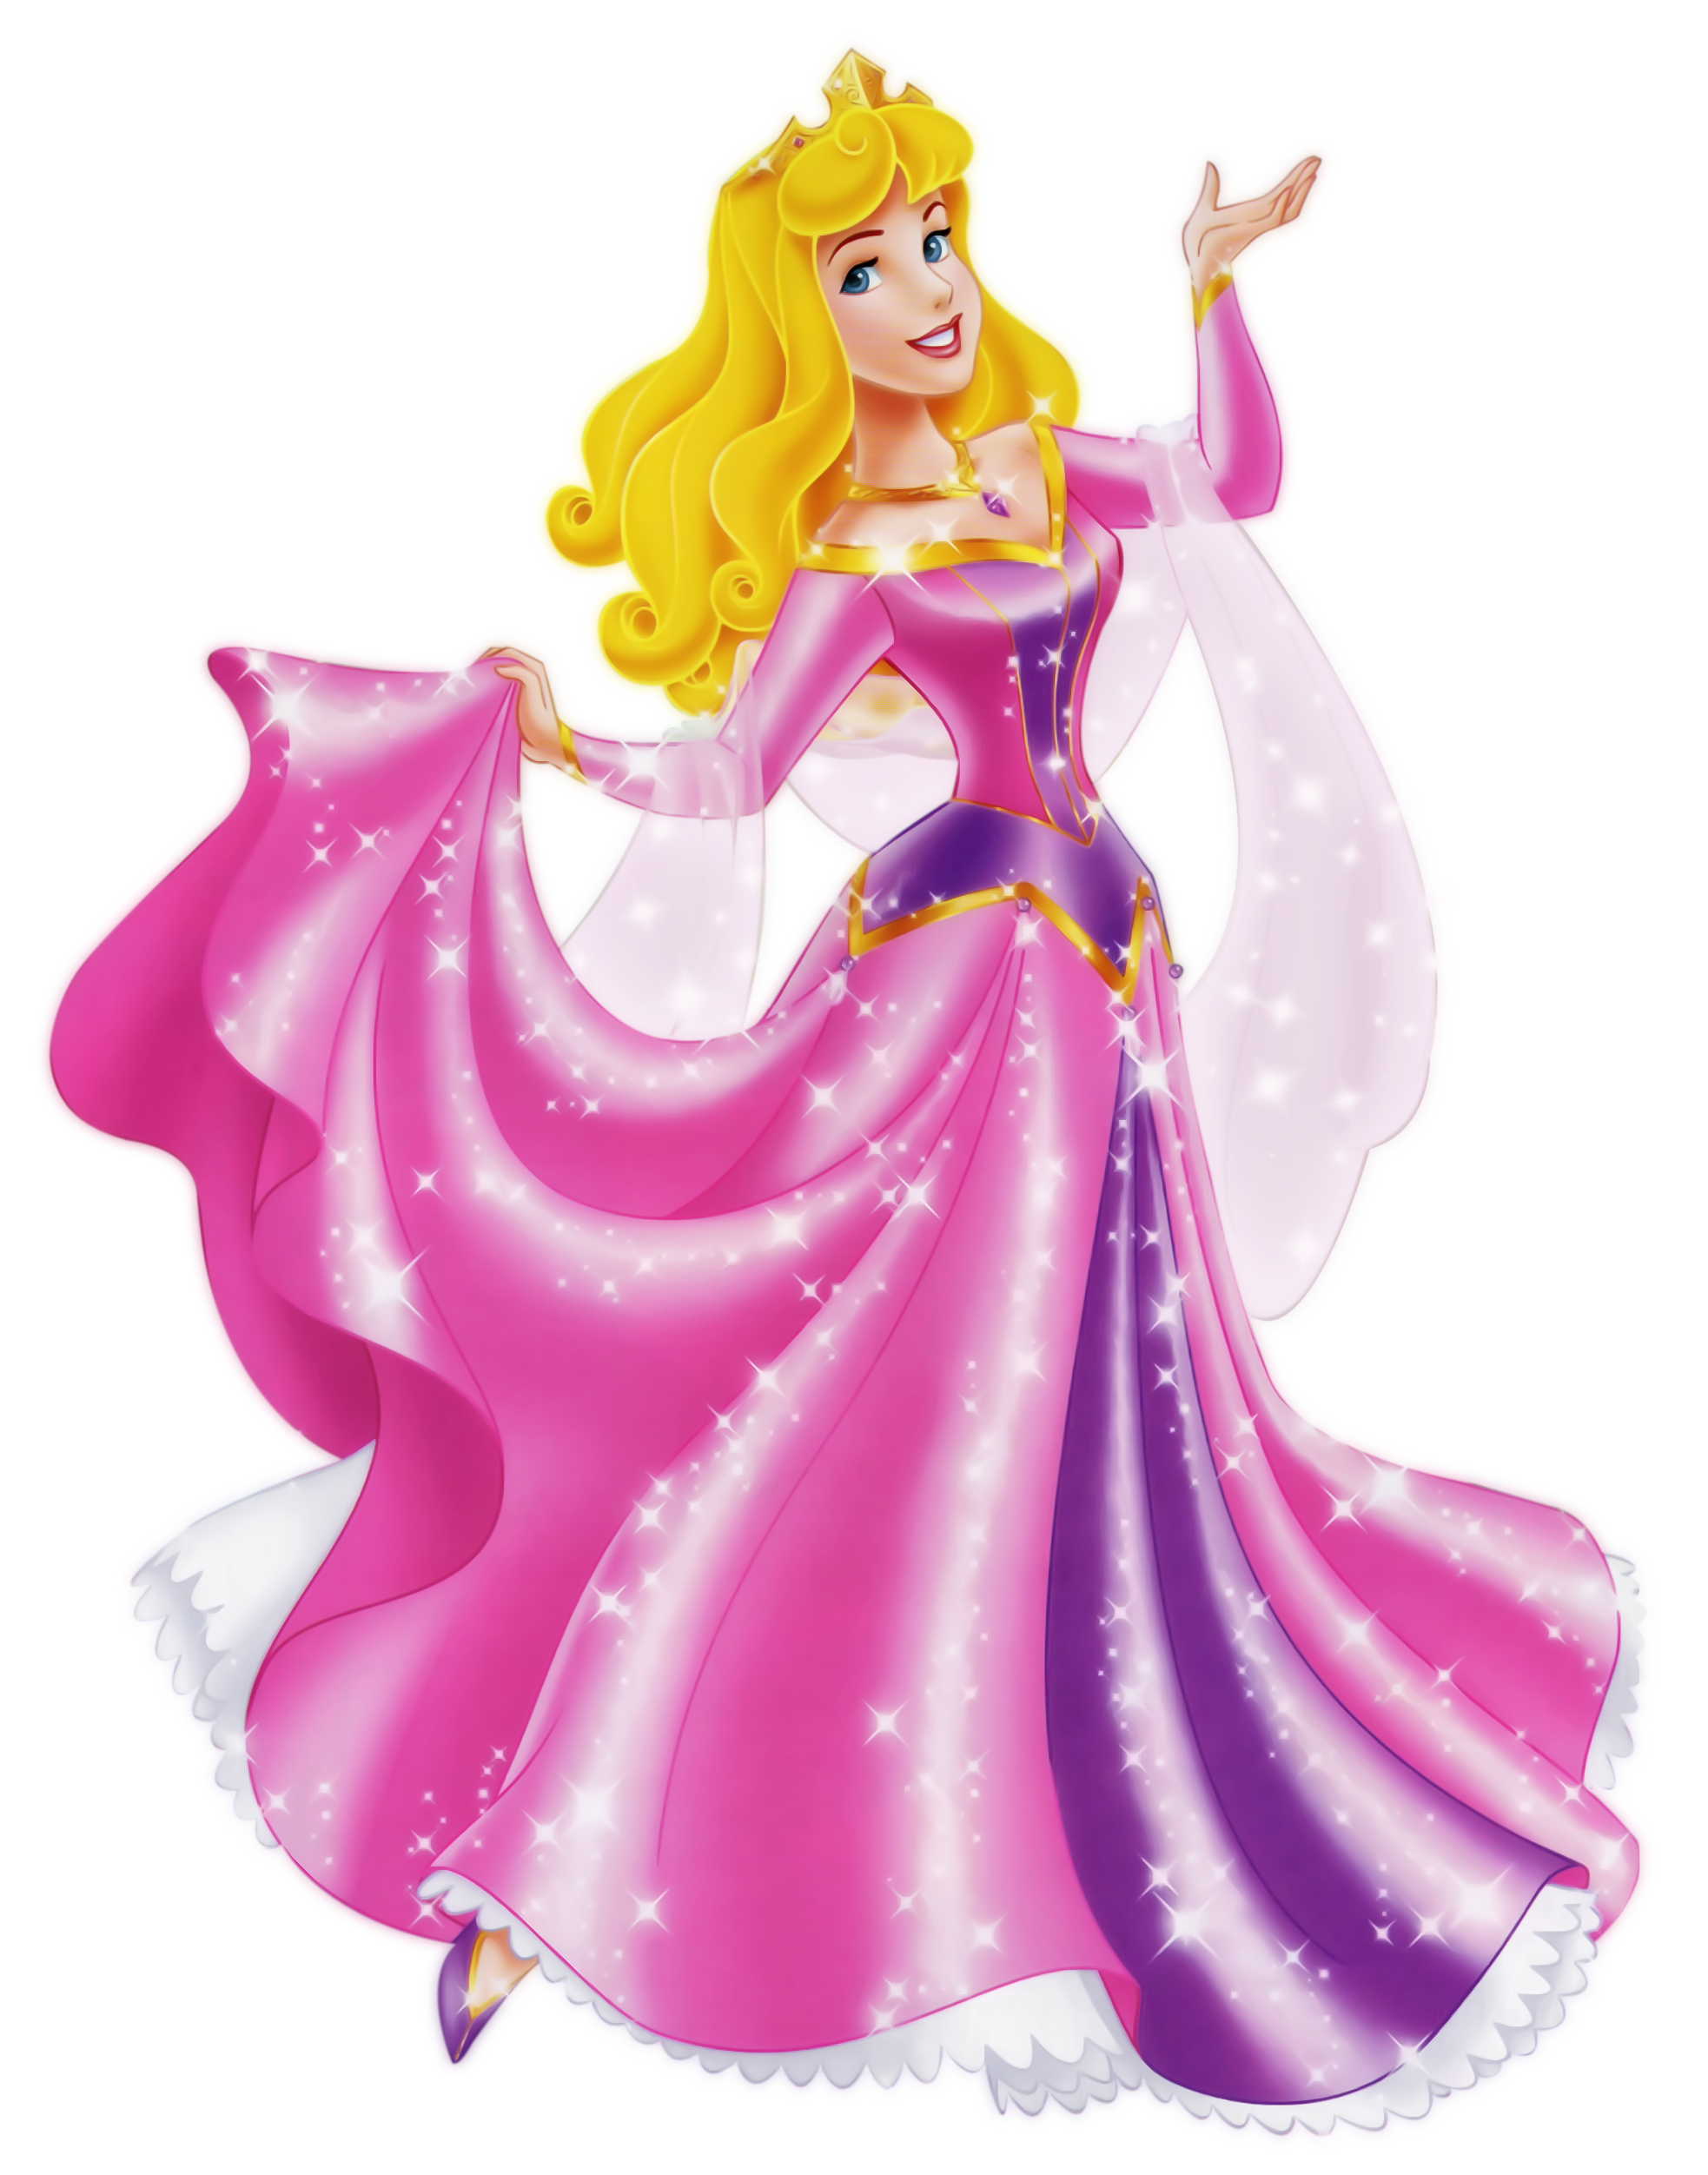 doll clipart,one clipart,magenta clipart,sleeping beauty clipart,pink clipa...